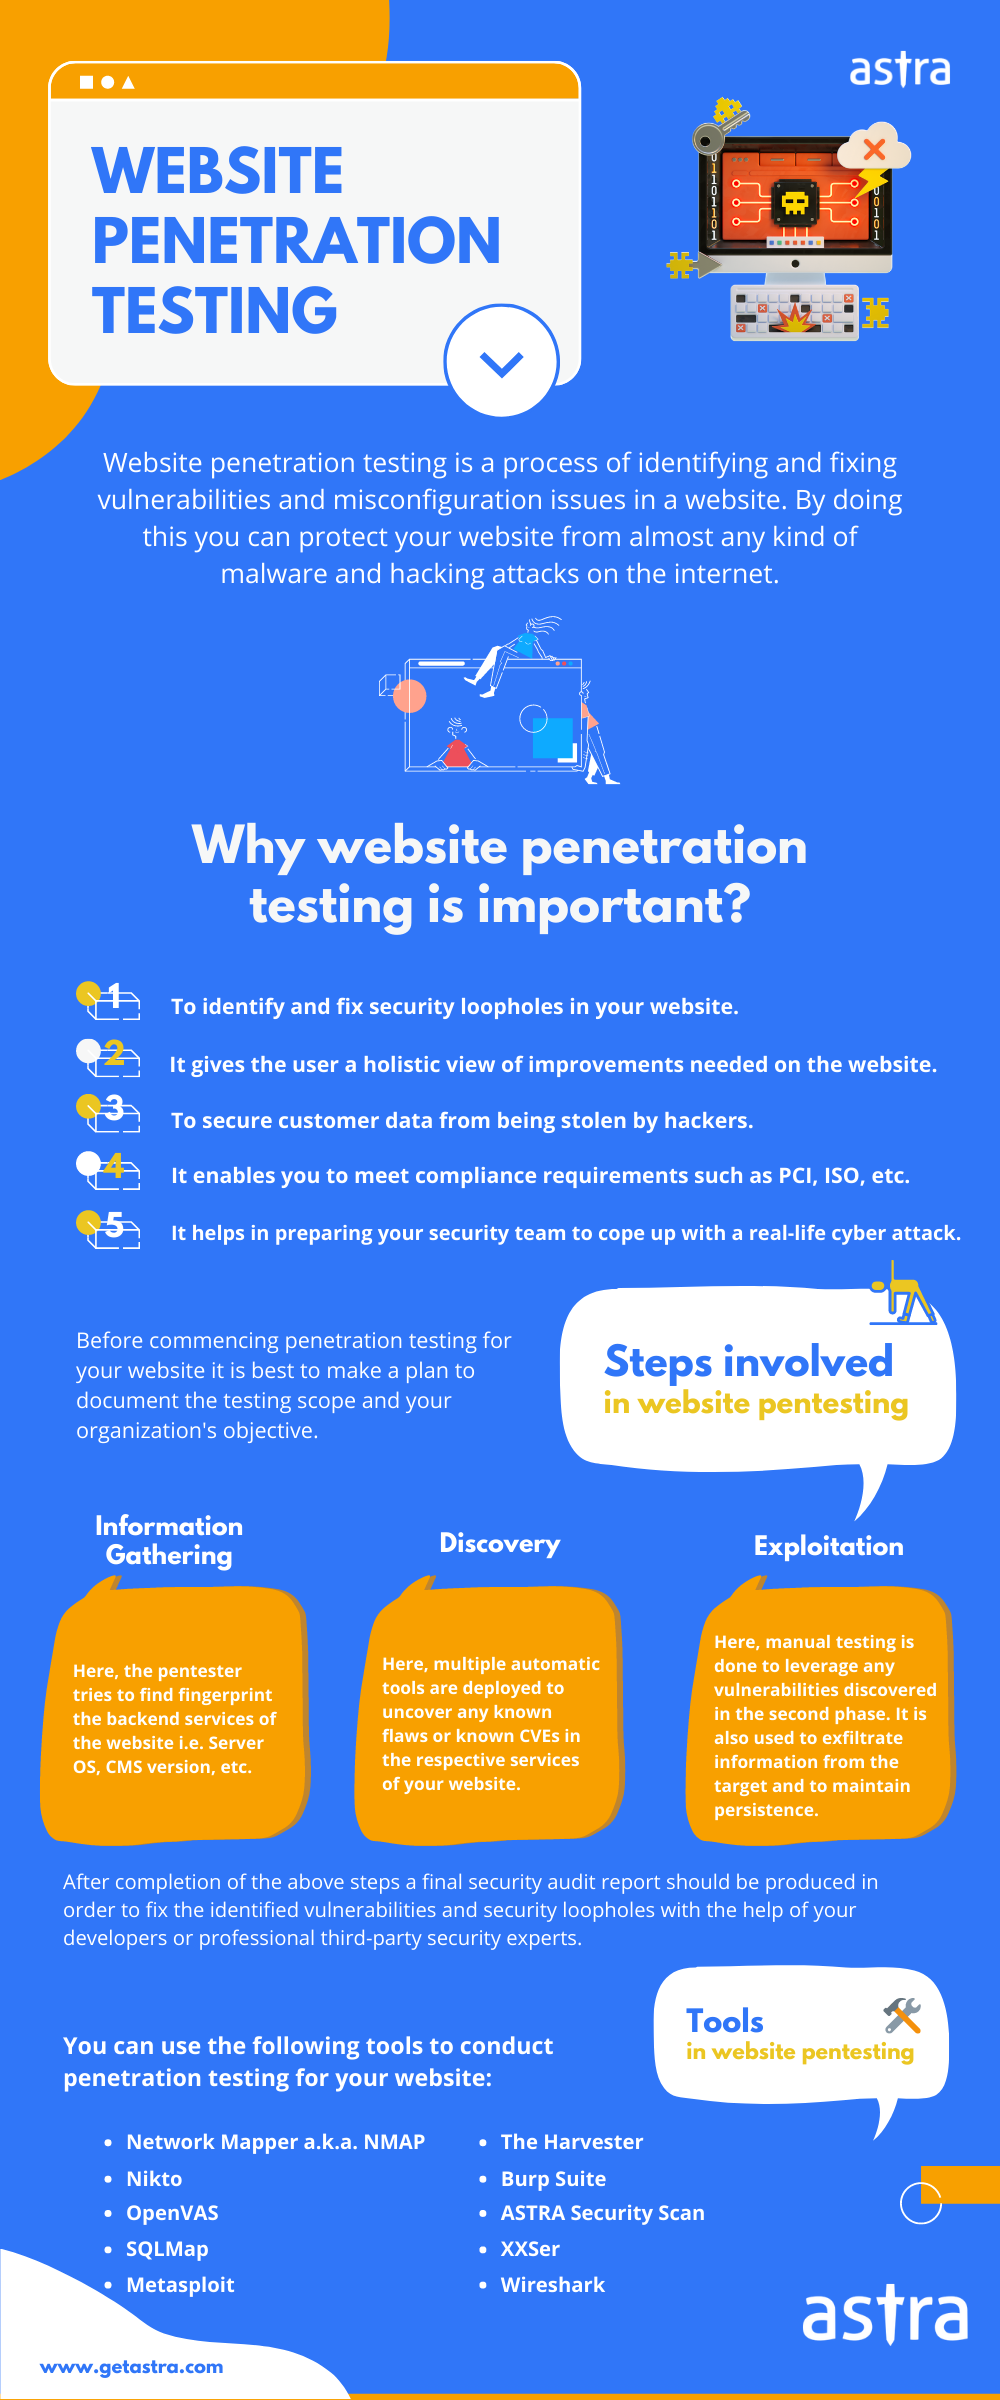 website penetration testing infographic by Astra Security